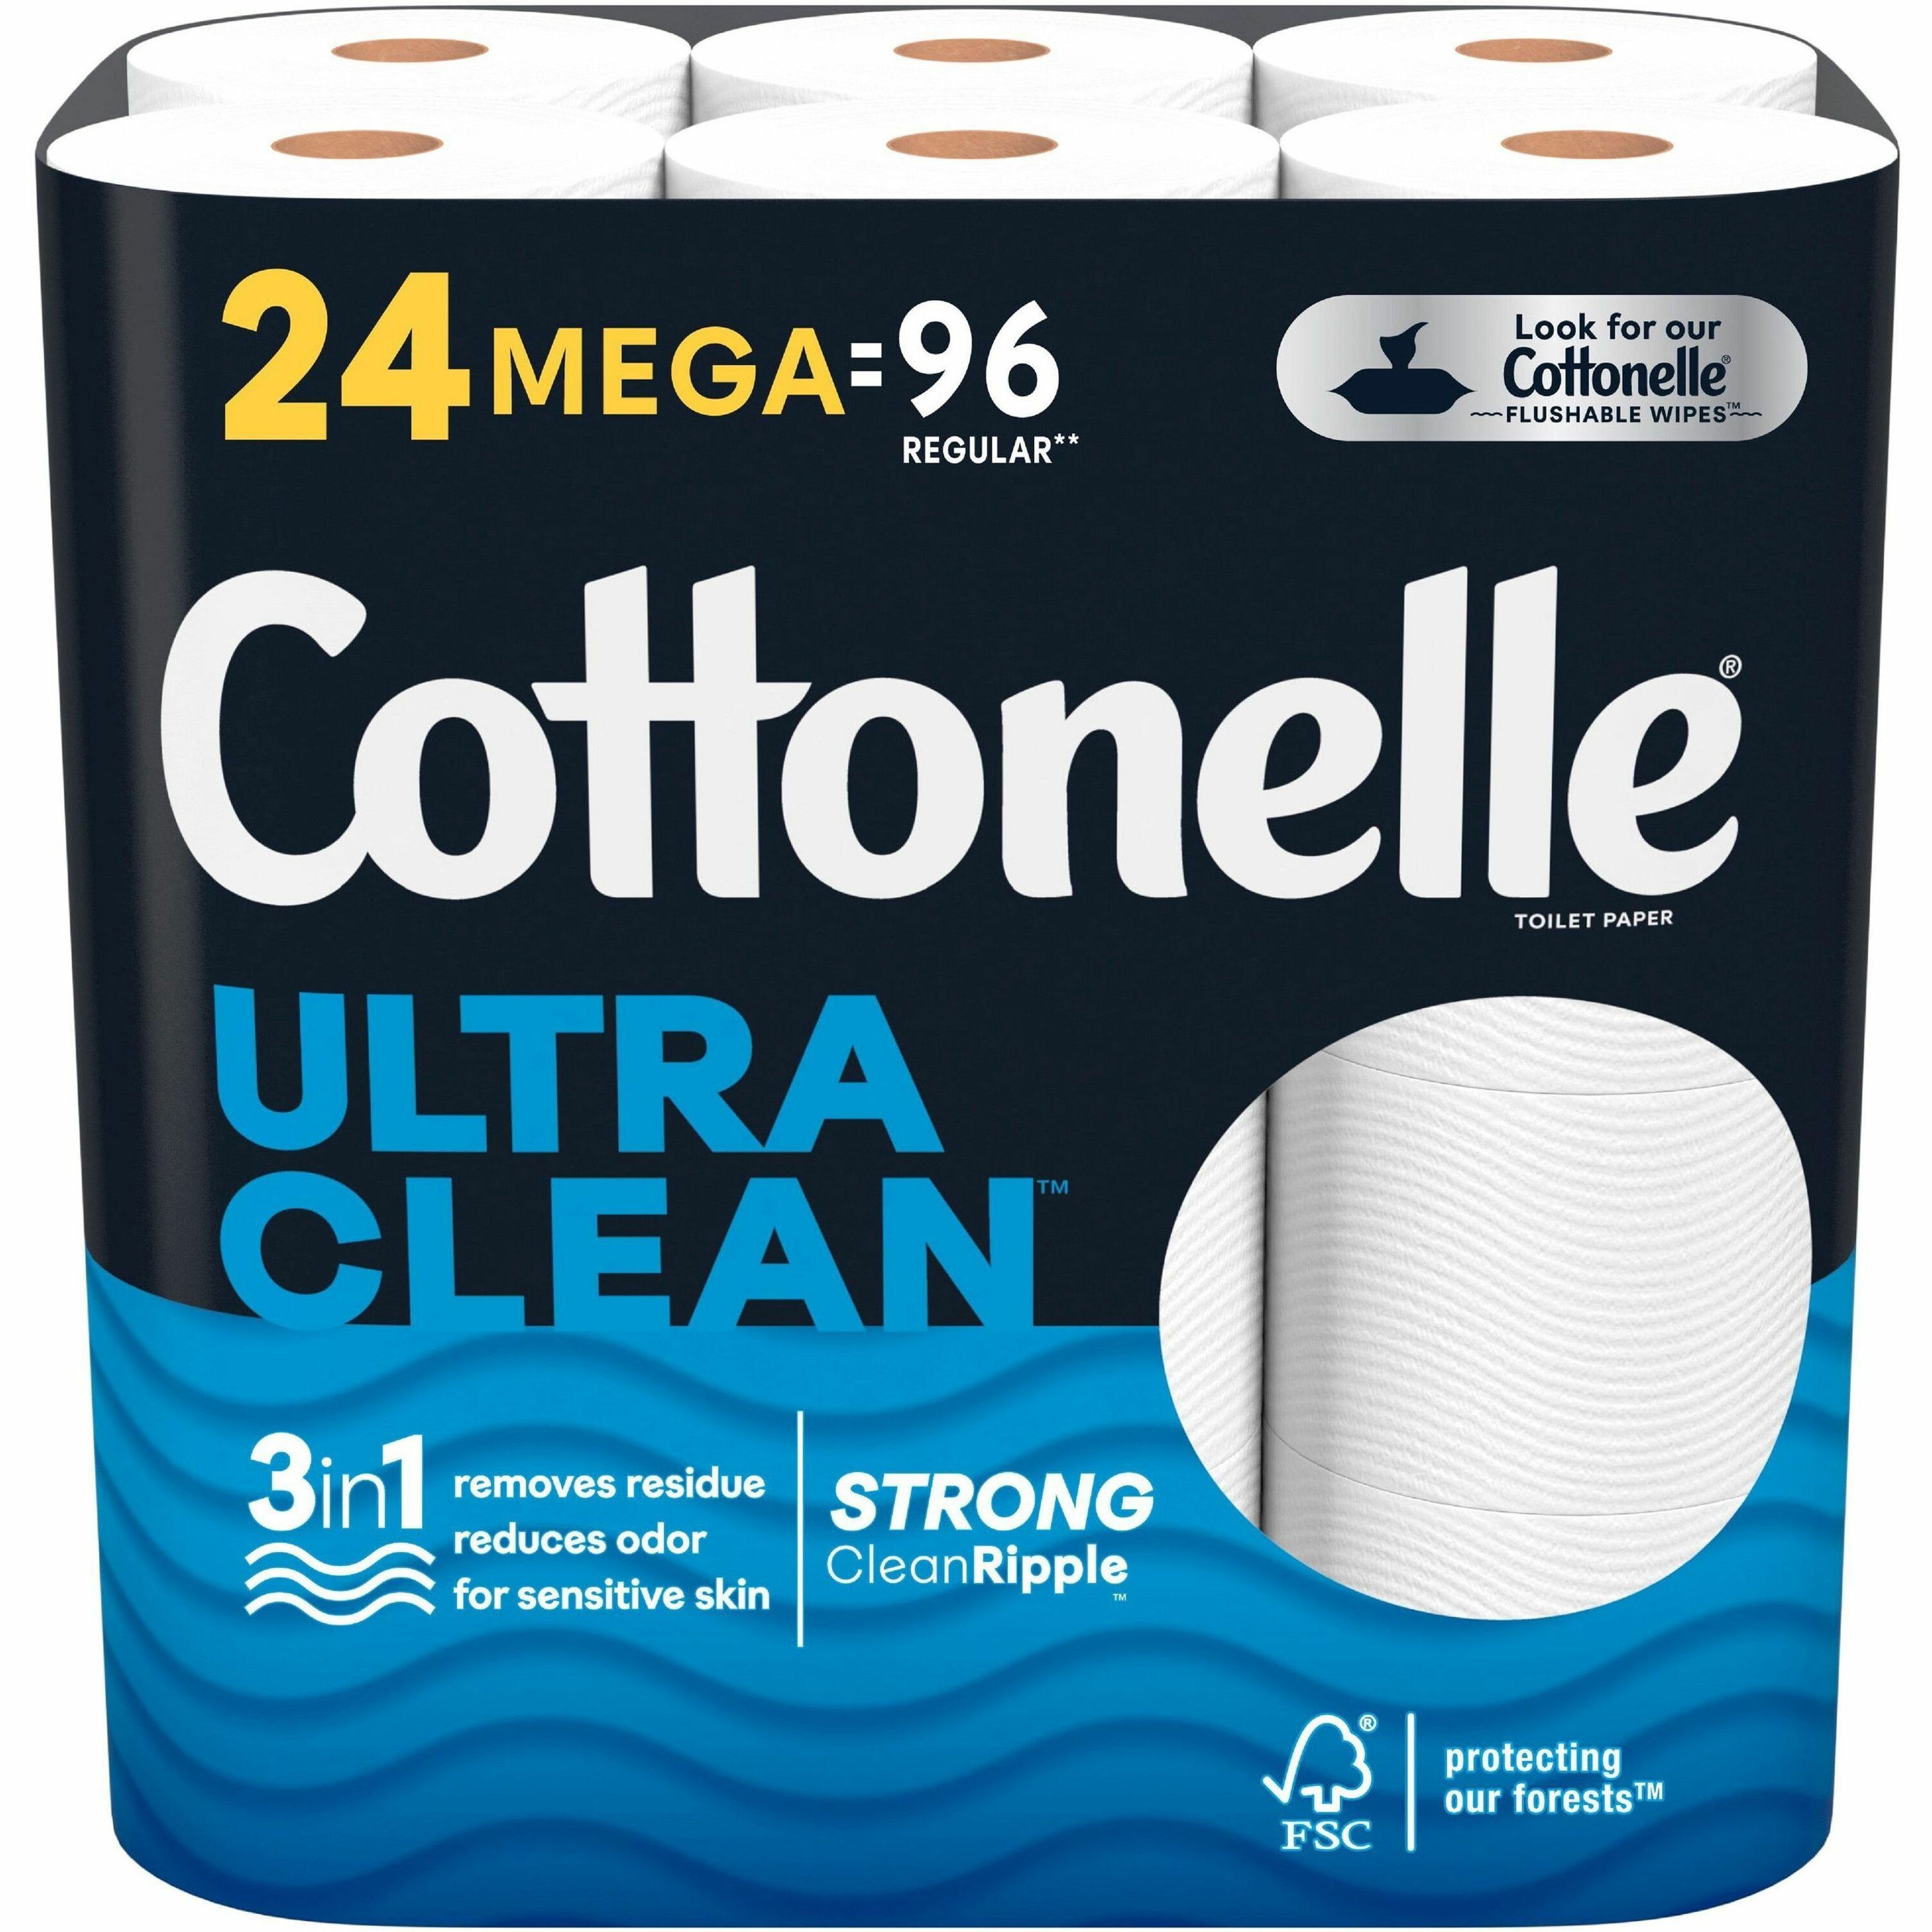 cottonelle-ultra-clean-toilet-paper-1-ply-312-sheets-roll-white-fiber-flushable-clog-safe-sewer-safe-septic-safe-chemical-free-dye-free-thick-absorbent-fragrance-free-paraben-free-for-toilet-2-carton_kcc54161ct - 1